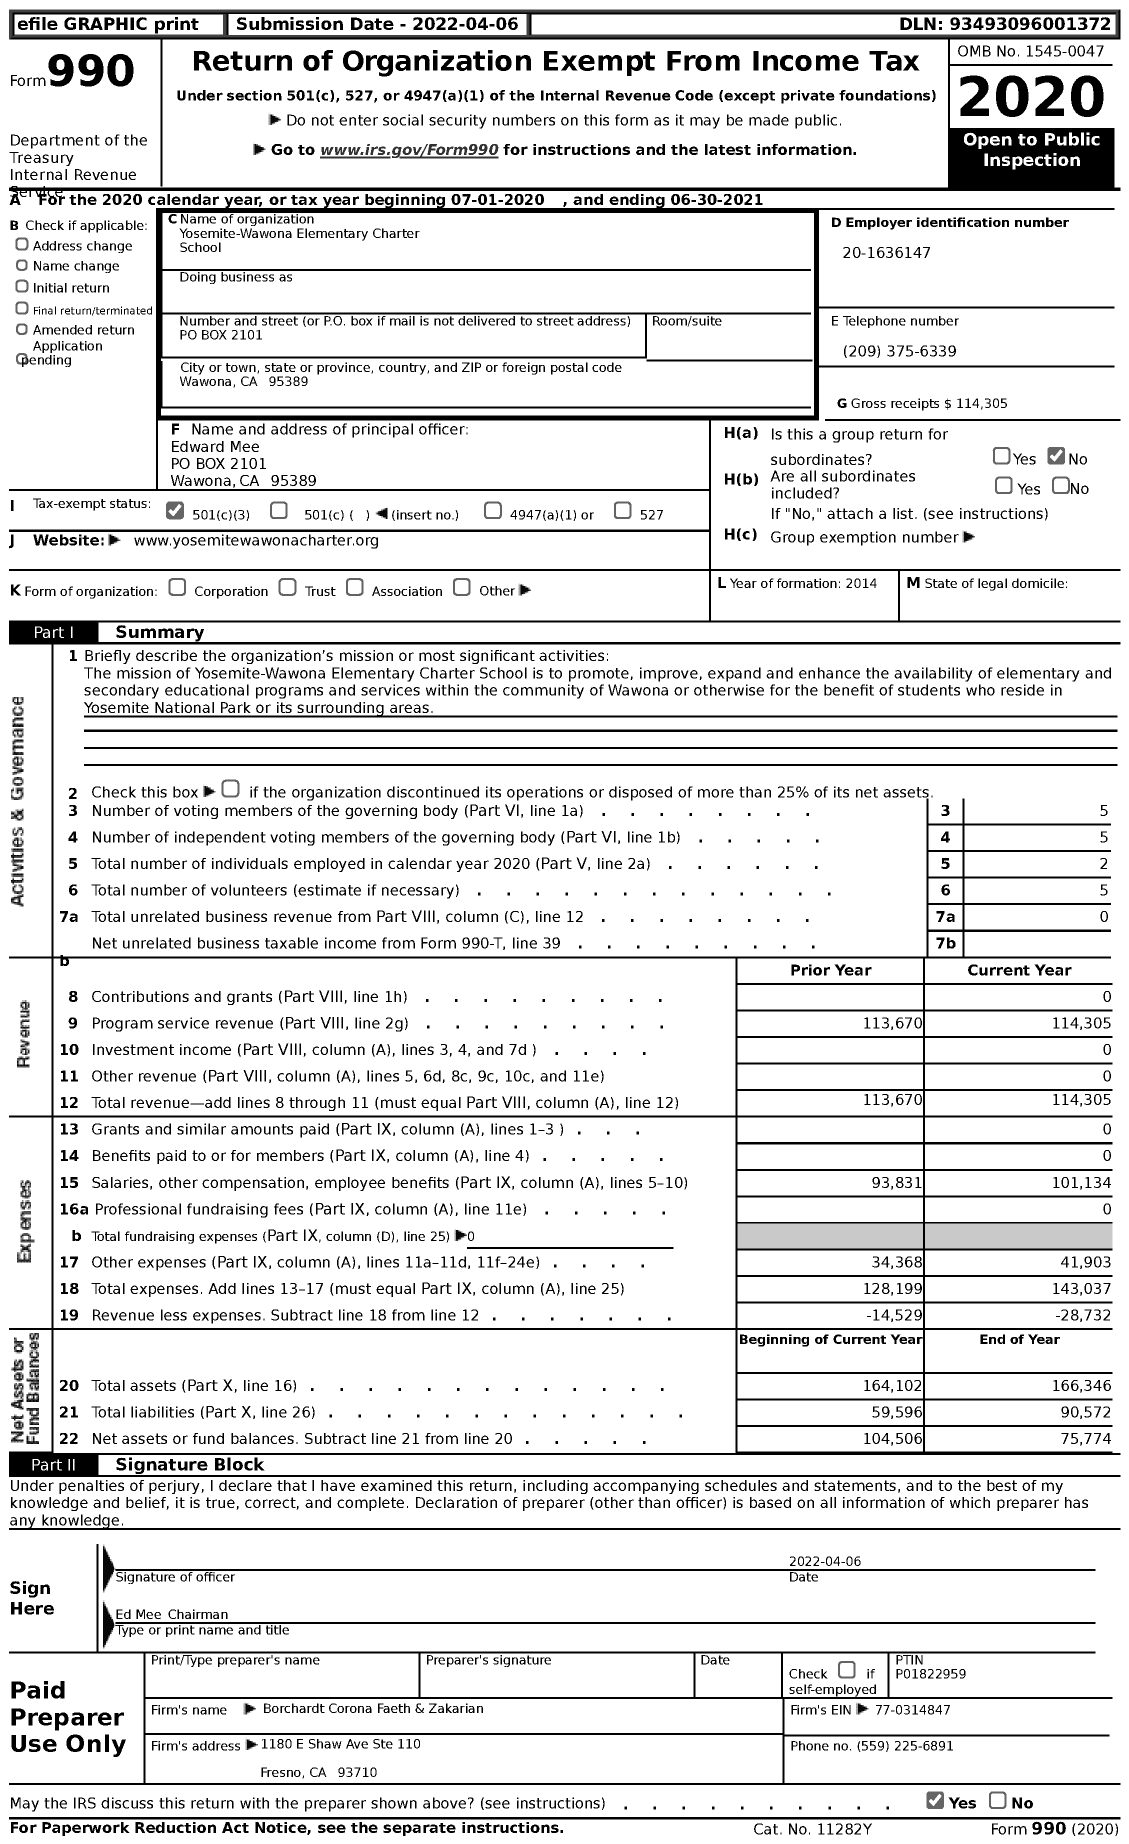 Image of first page of 2020 Form 990 for Yosemite-Wawona Elementary Charter School